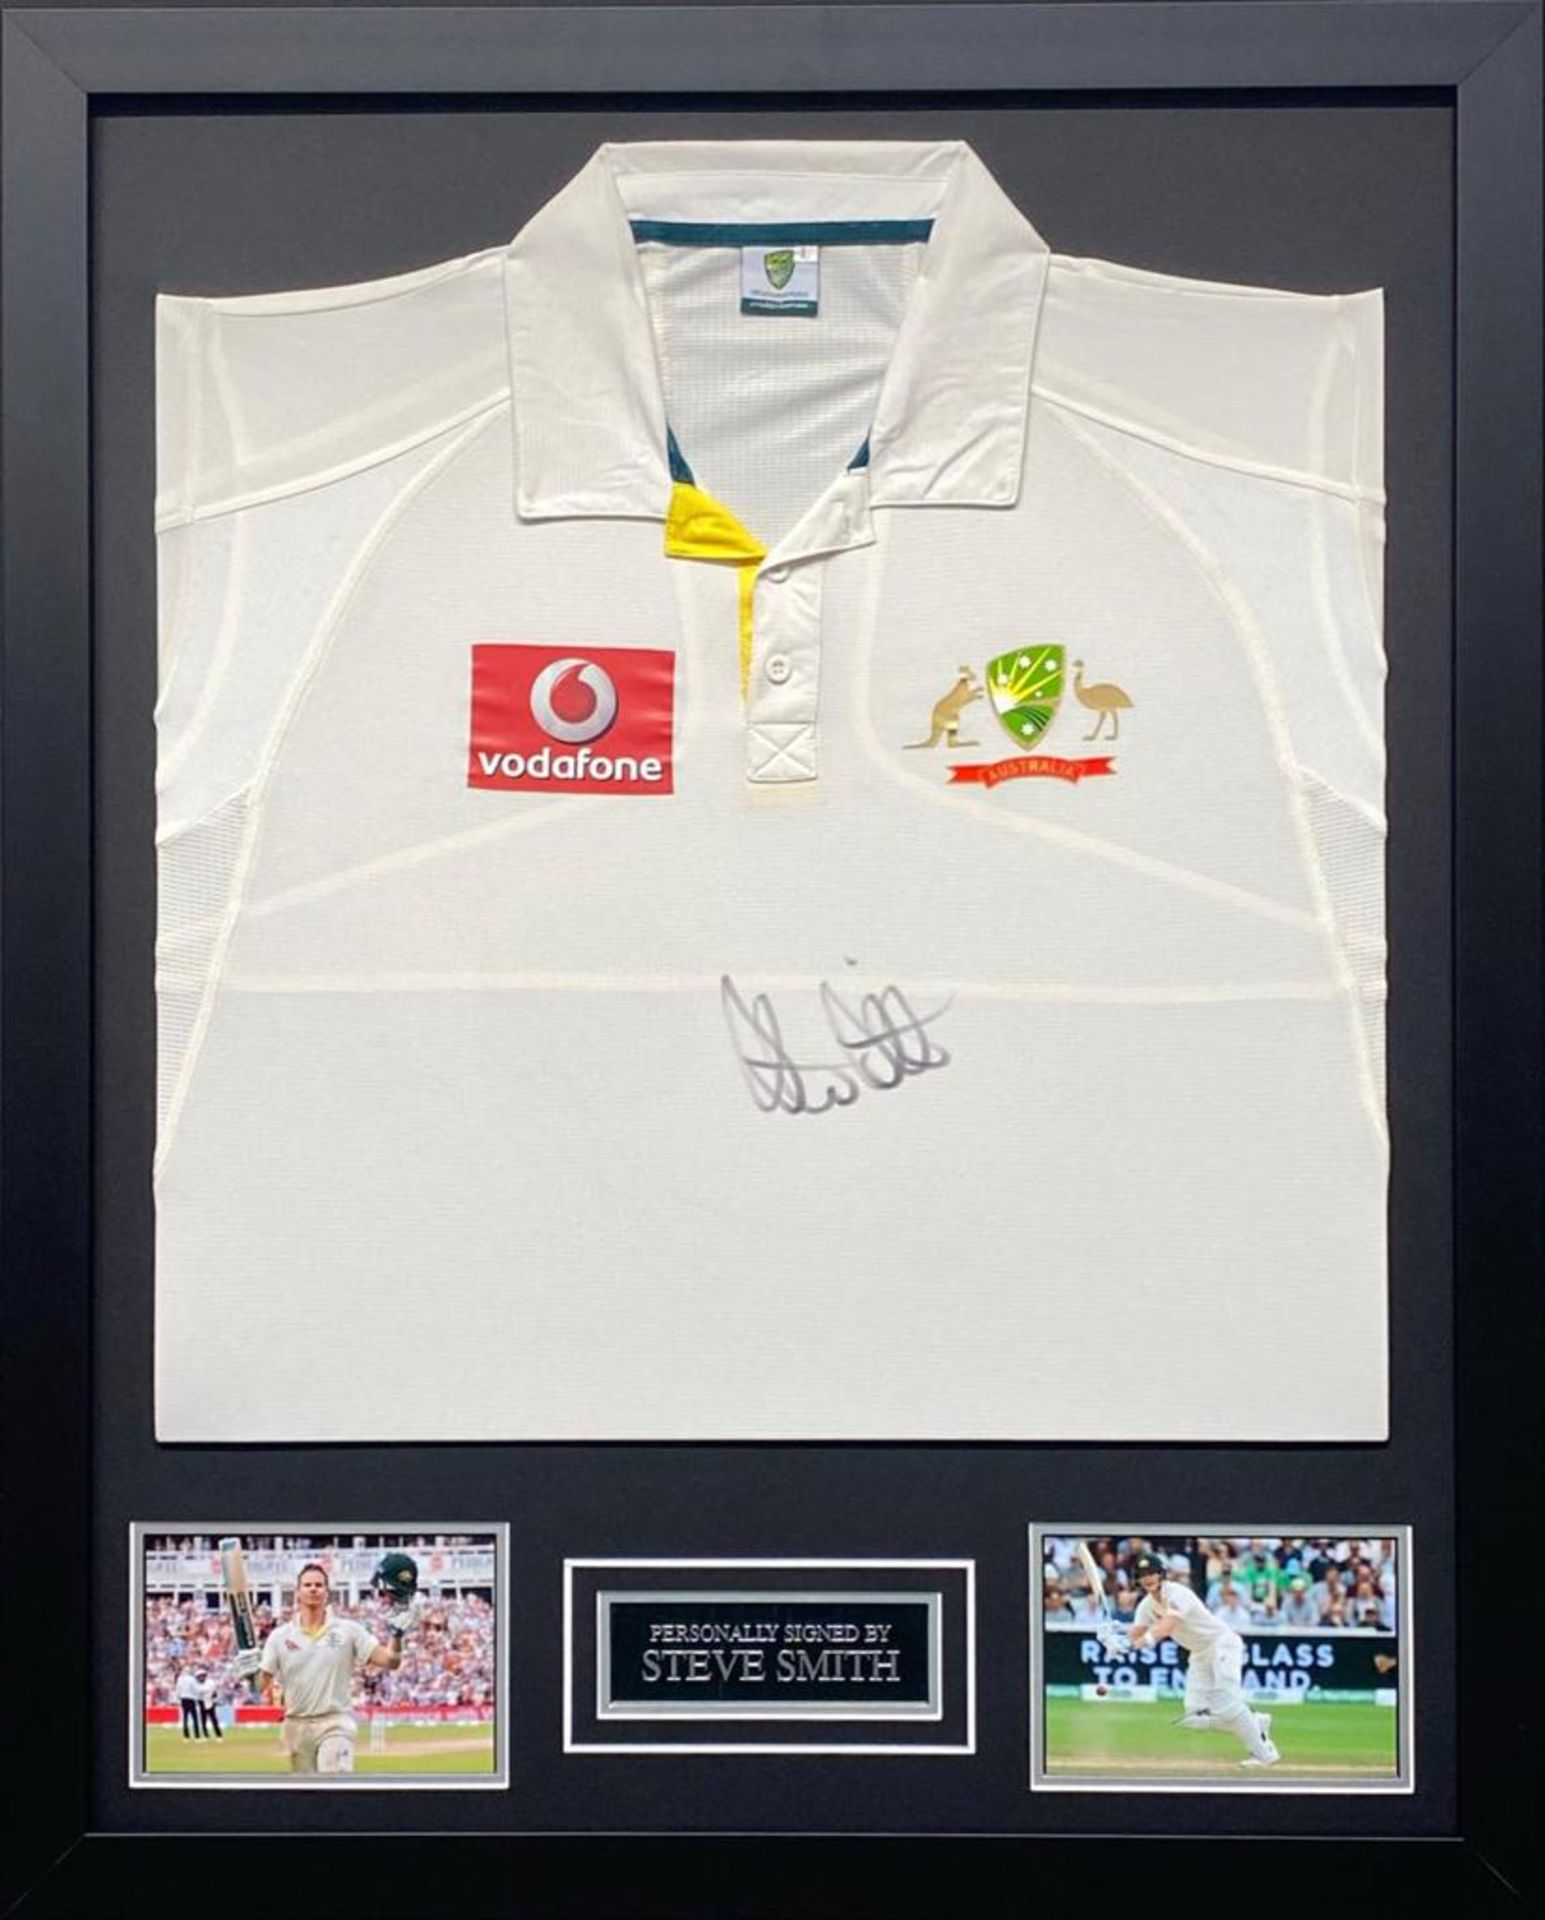 Steve Smith Signed And Framed Australia Cricket Jersey Supplied with Certificate Of Authenticity